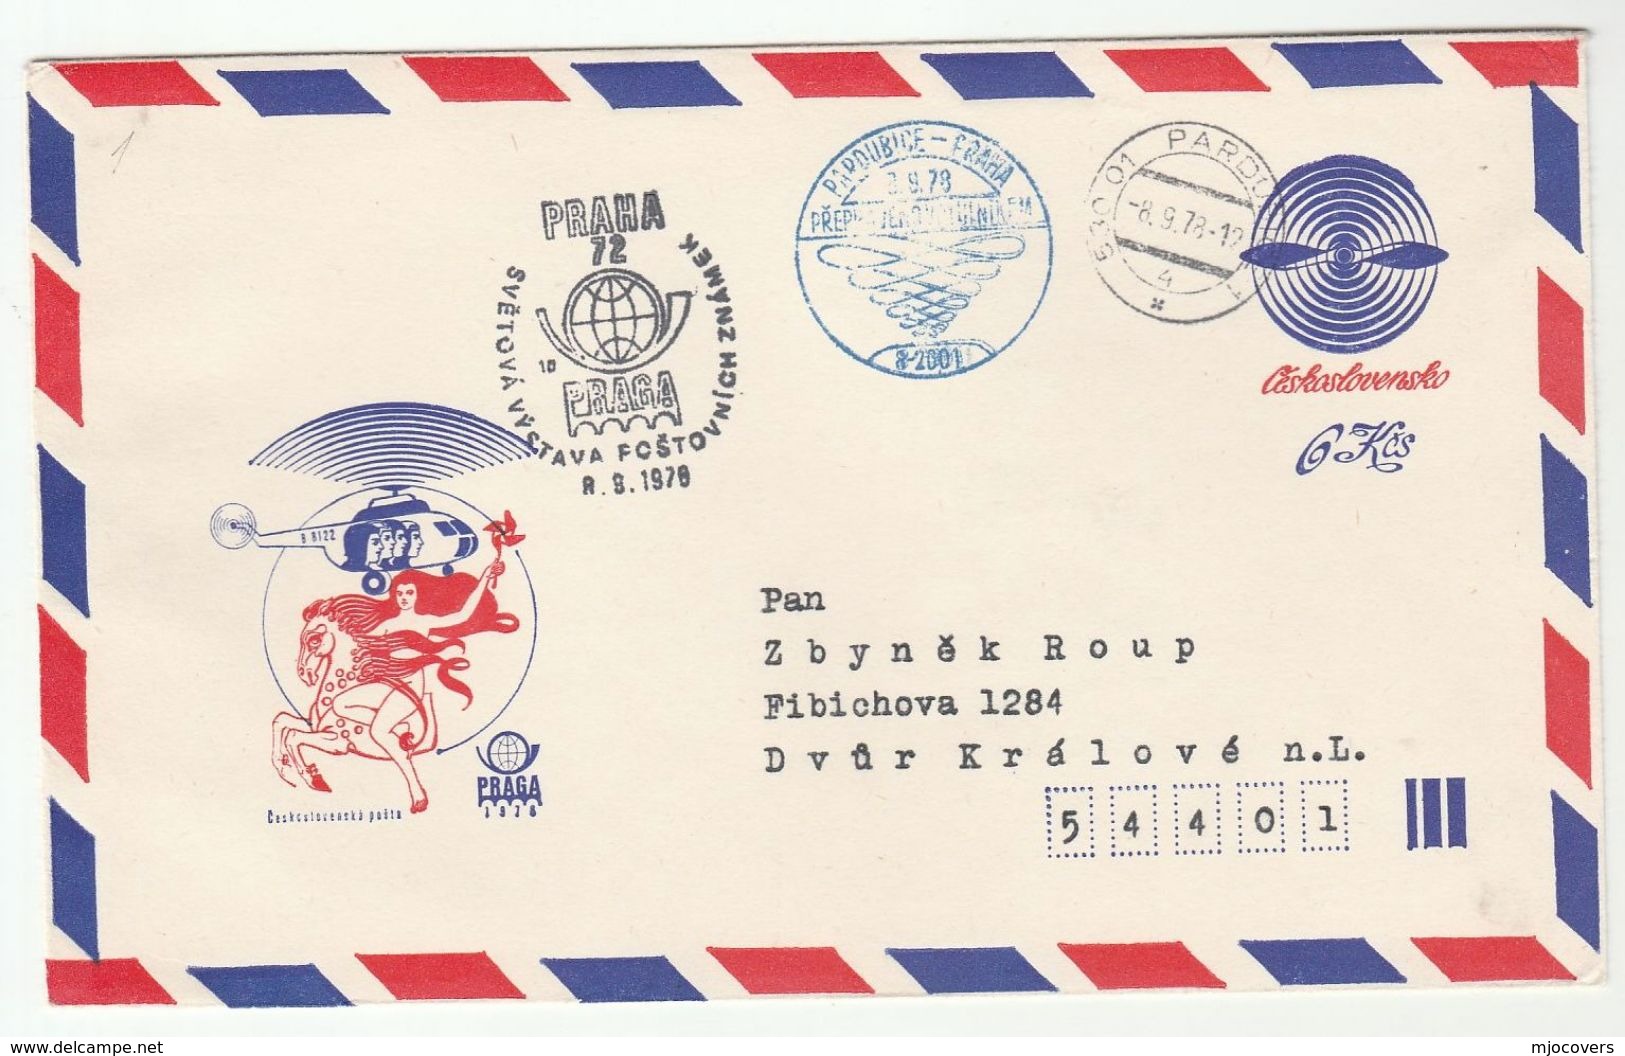 1978 CZECHOSLOVAKIA HELICOPTER FLIGHT COVER B2001 Pardubice  Prag SPECIAL Airmail POSTAL STATIONERY Aviation Stamps - Covers